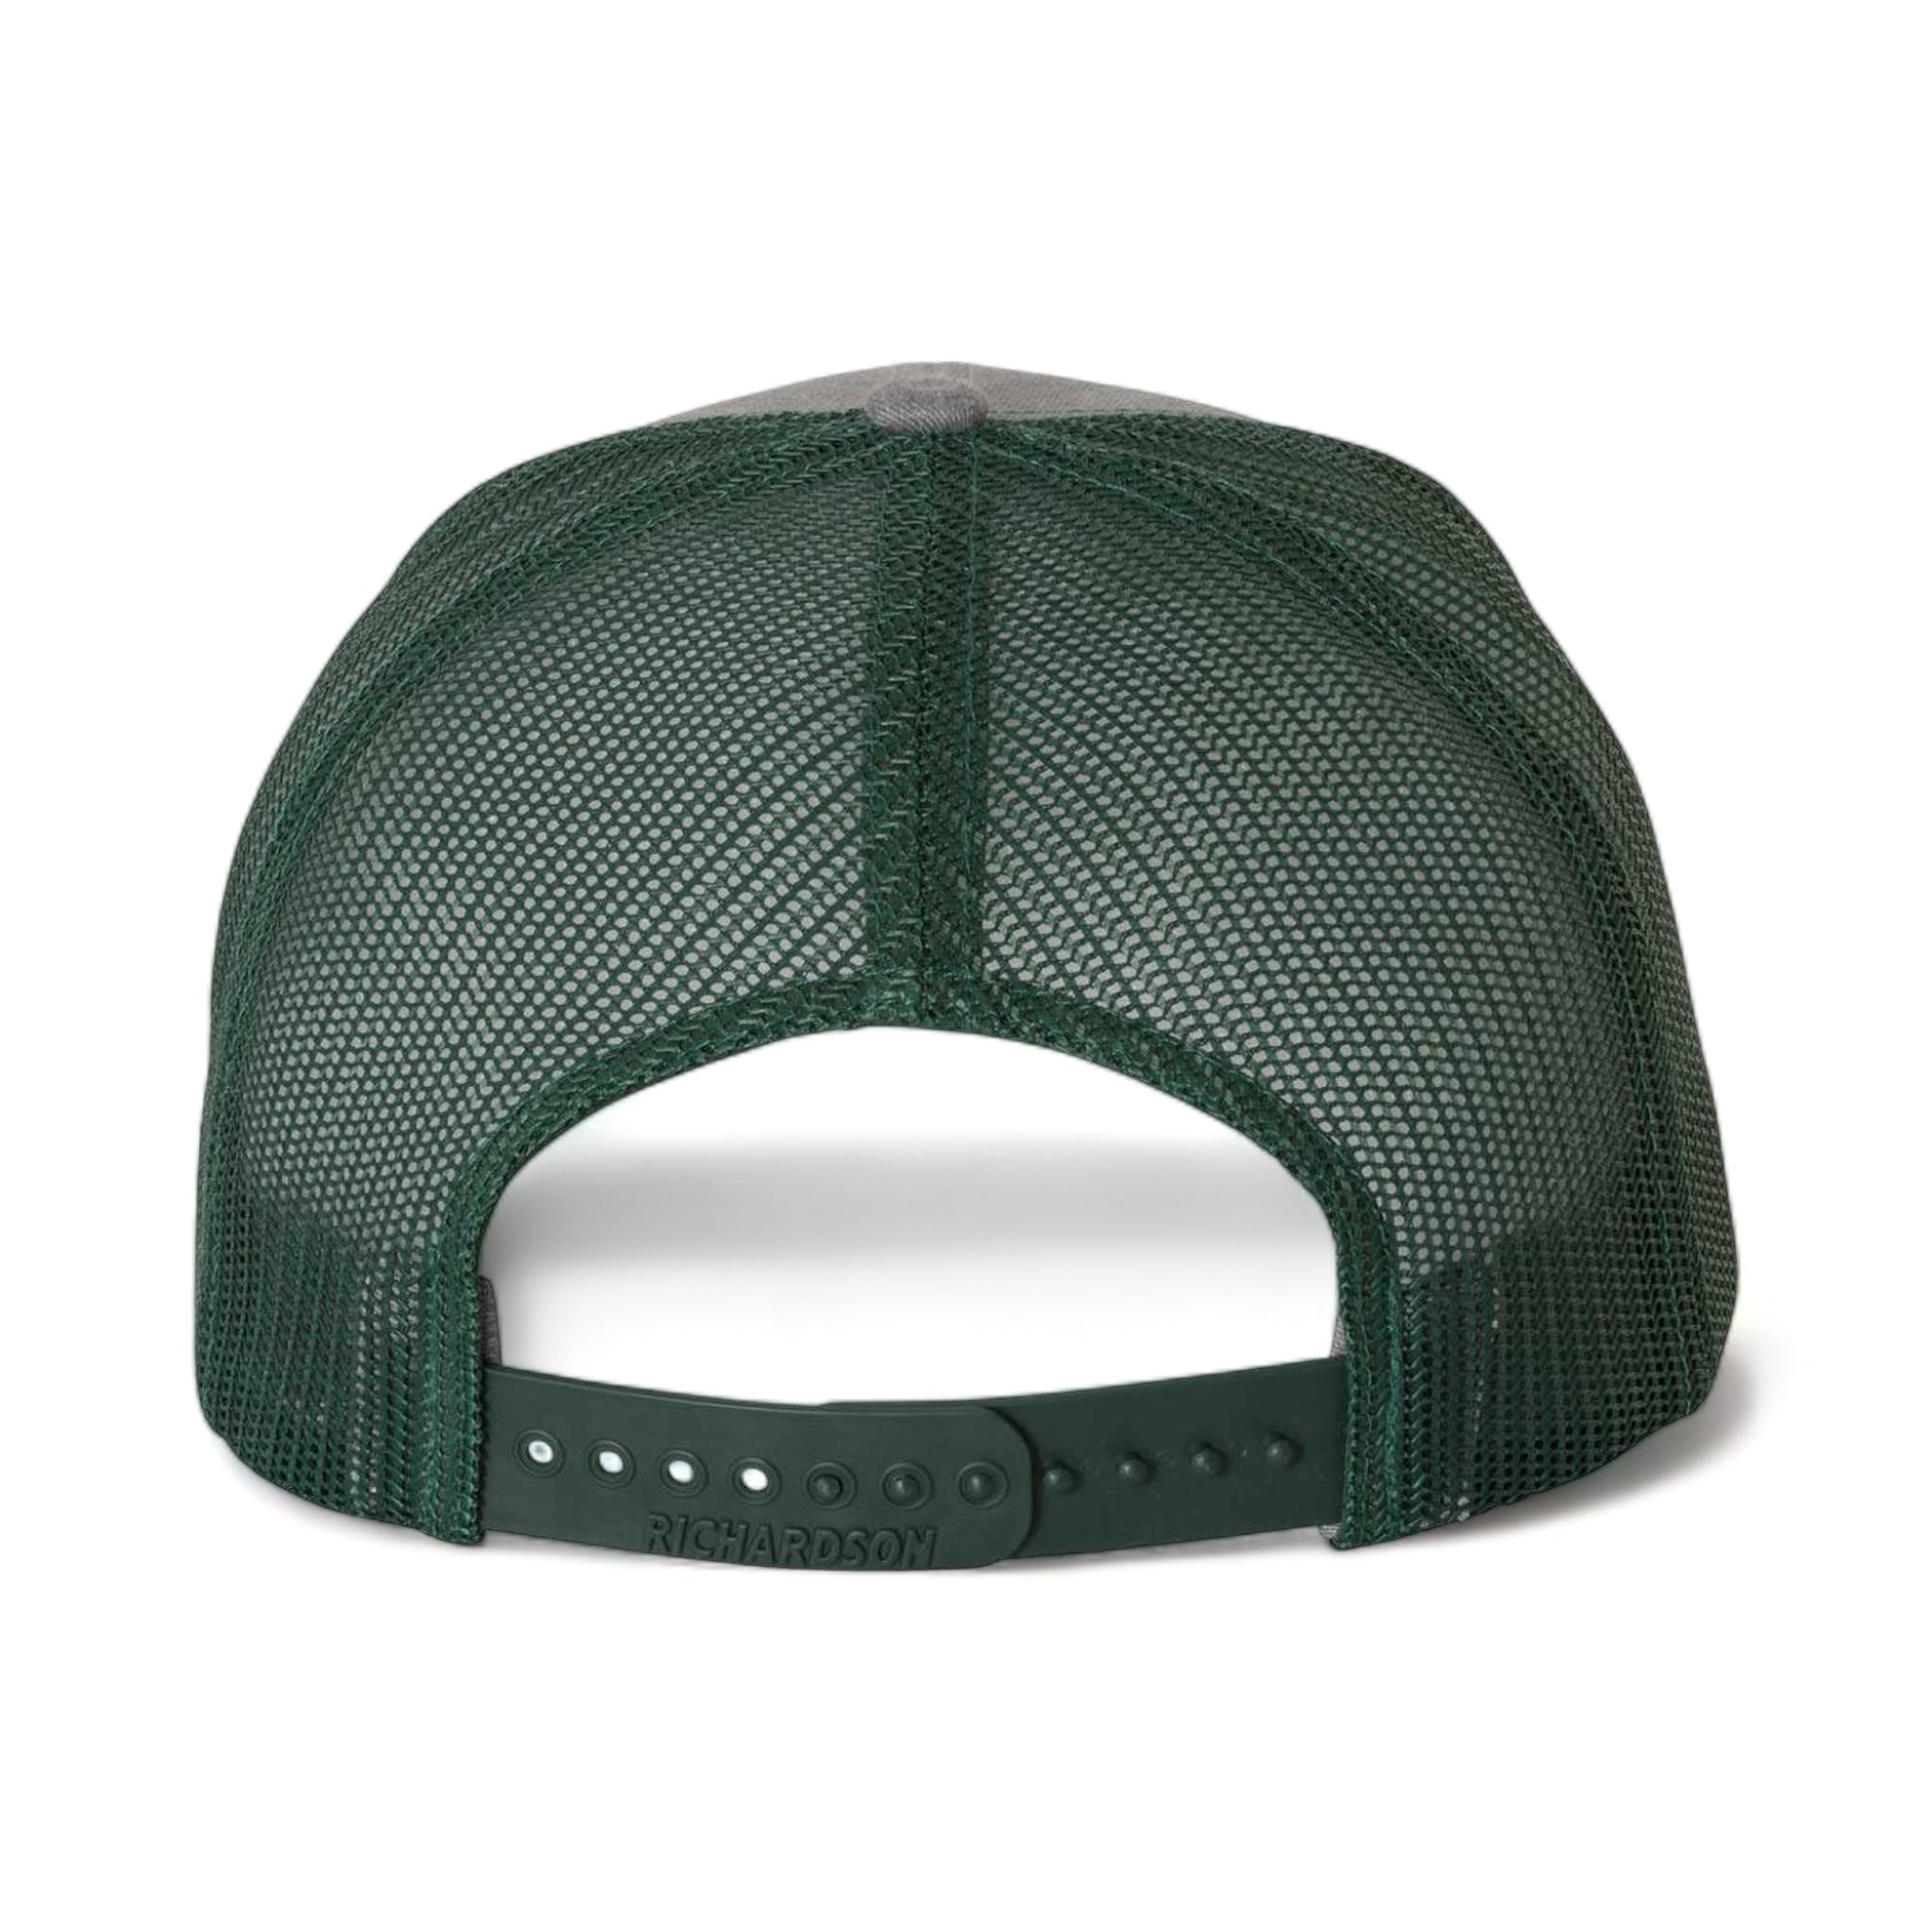 Back view of Richardson 112 custom hat in heather grey and dark green